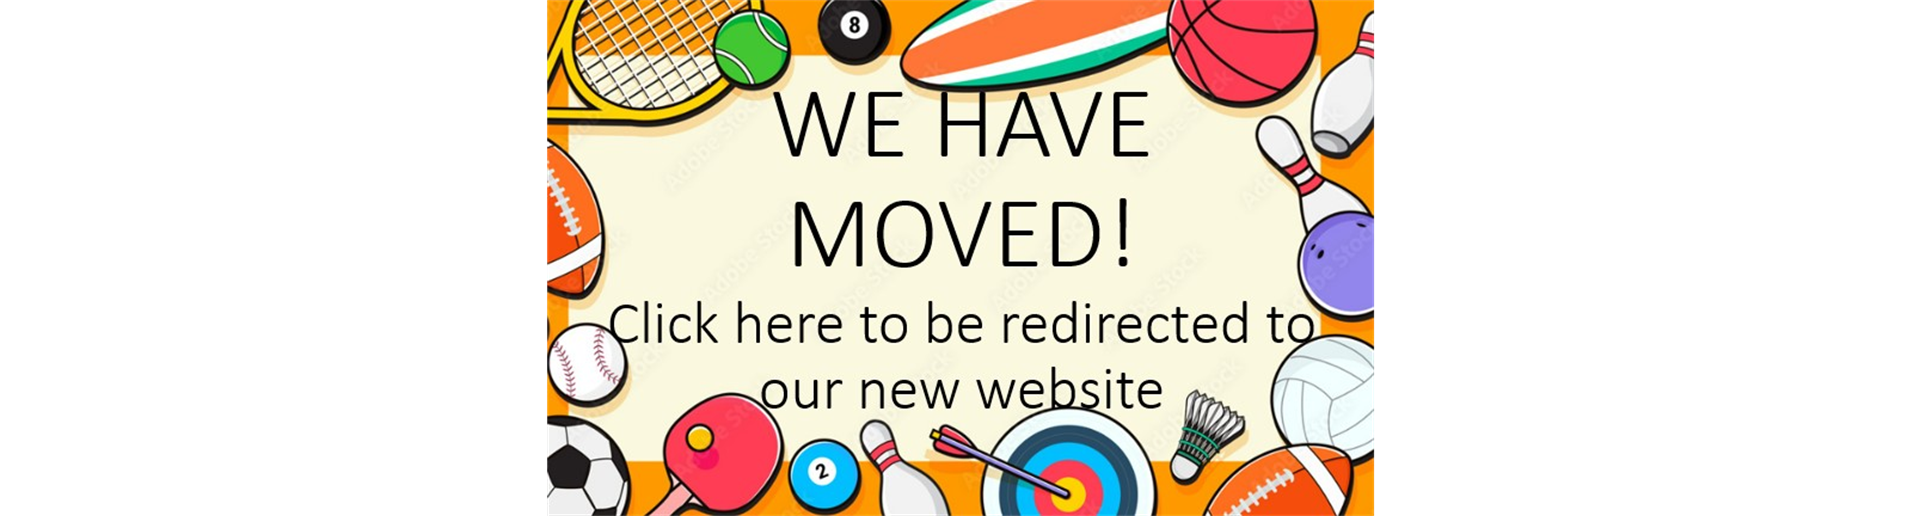 We have moved to a new website